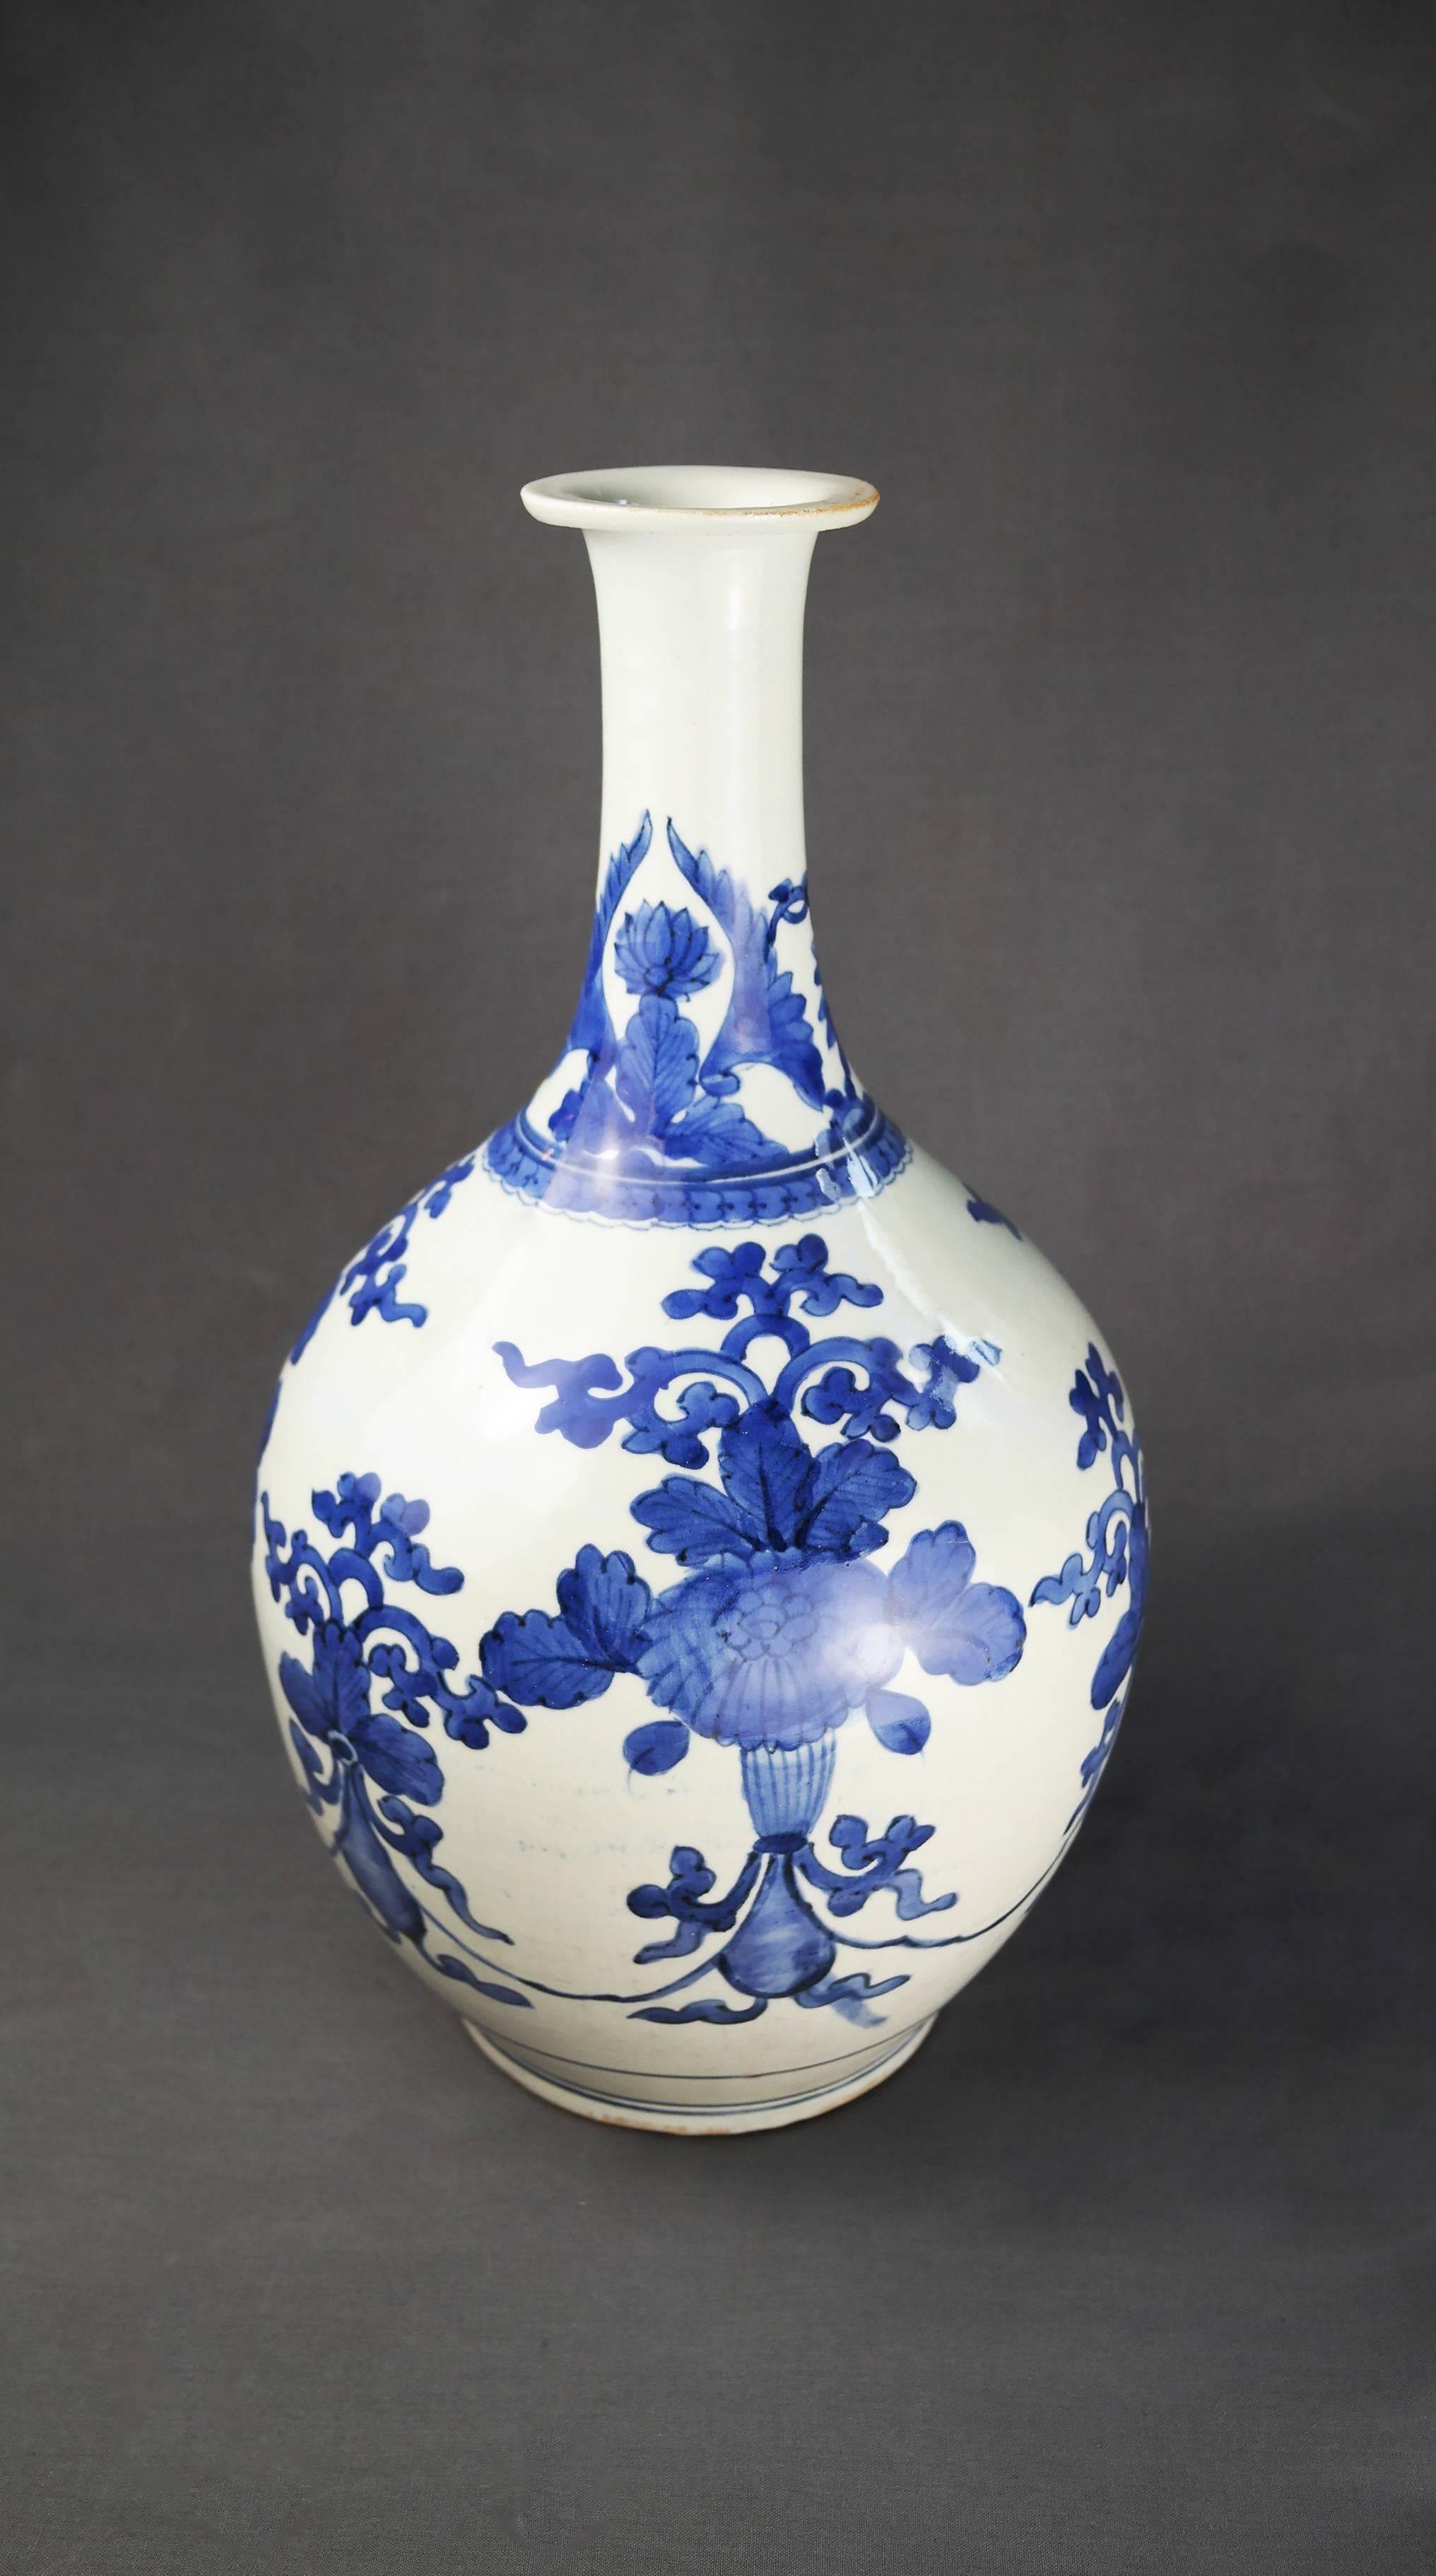 Followed the two invasions led by Toyotomi Hideyoshi, many of the Korean potters came to Japan in the late 16th century. In addition, Arita, the earliest kiln site of Japan, was able to provide suitable clay. Thereafter, porcelain production began